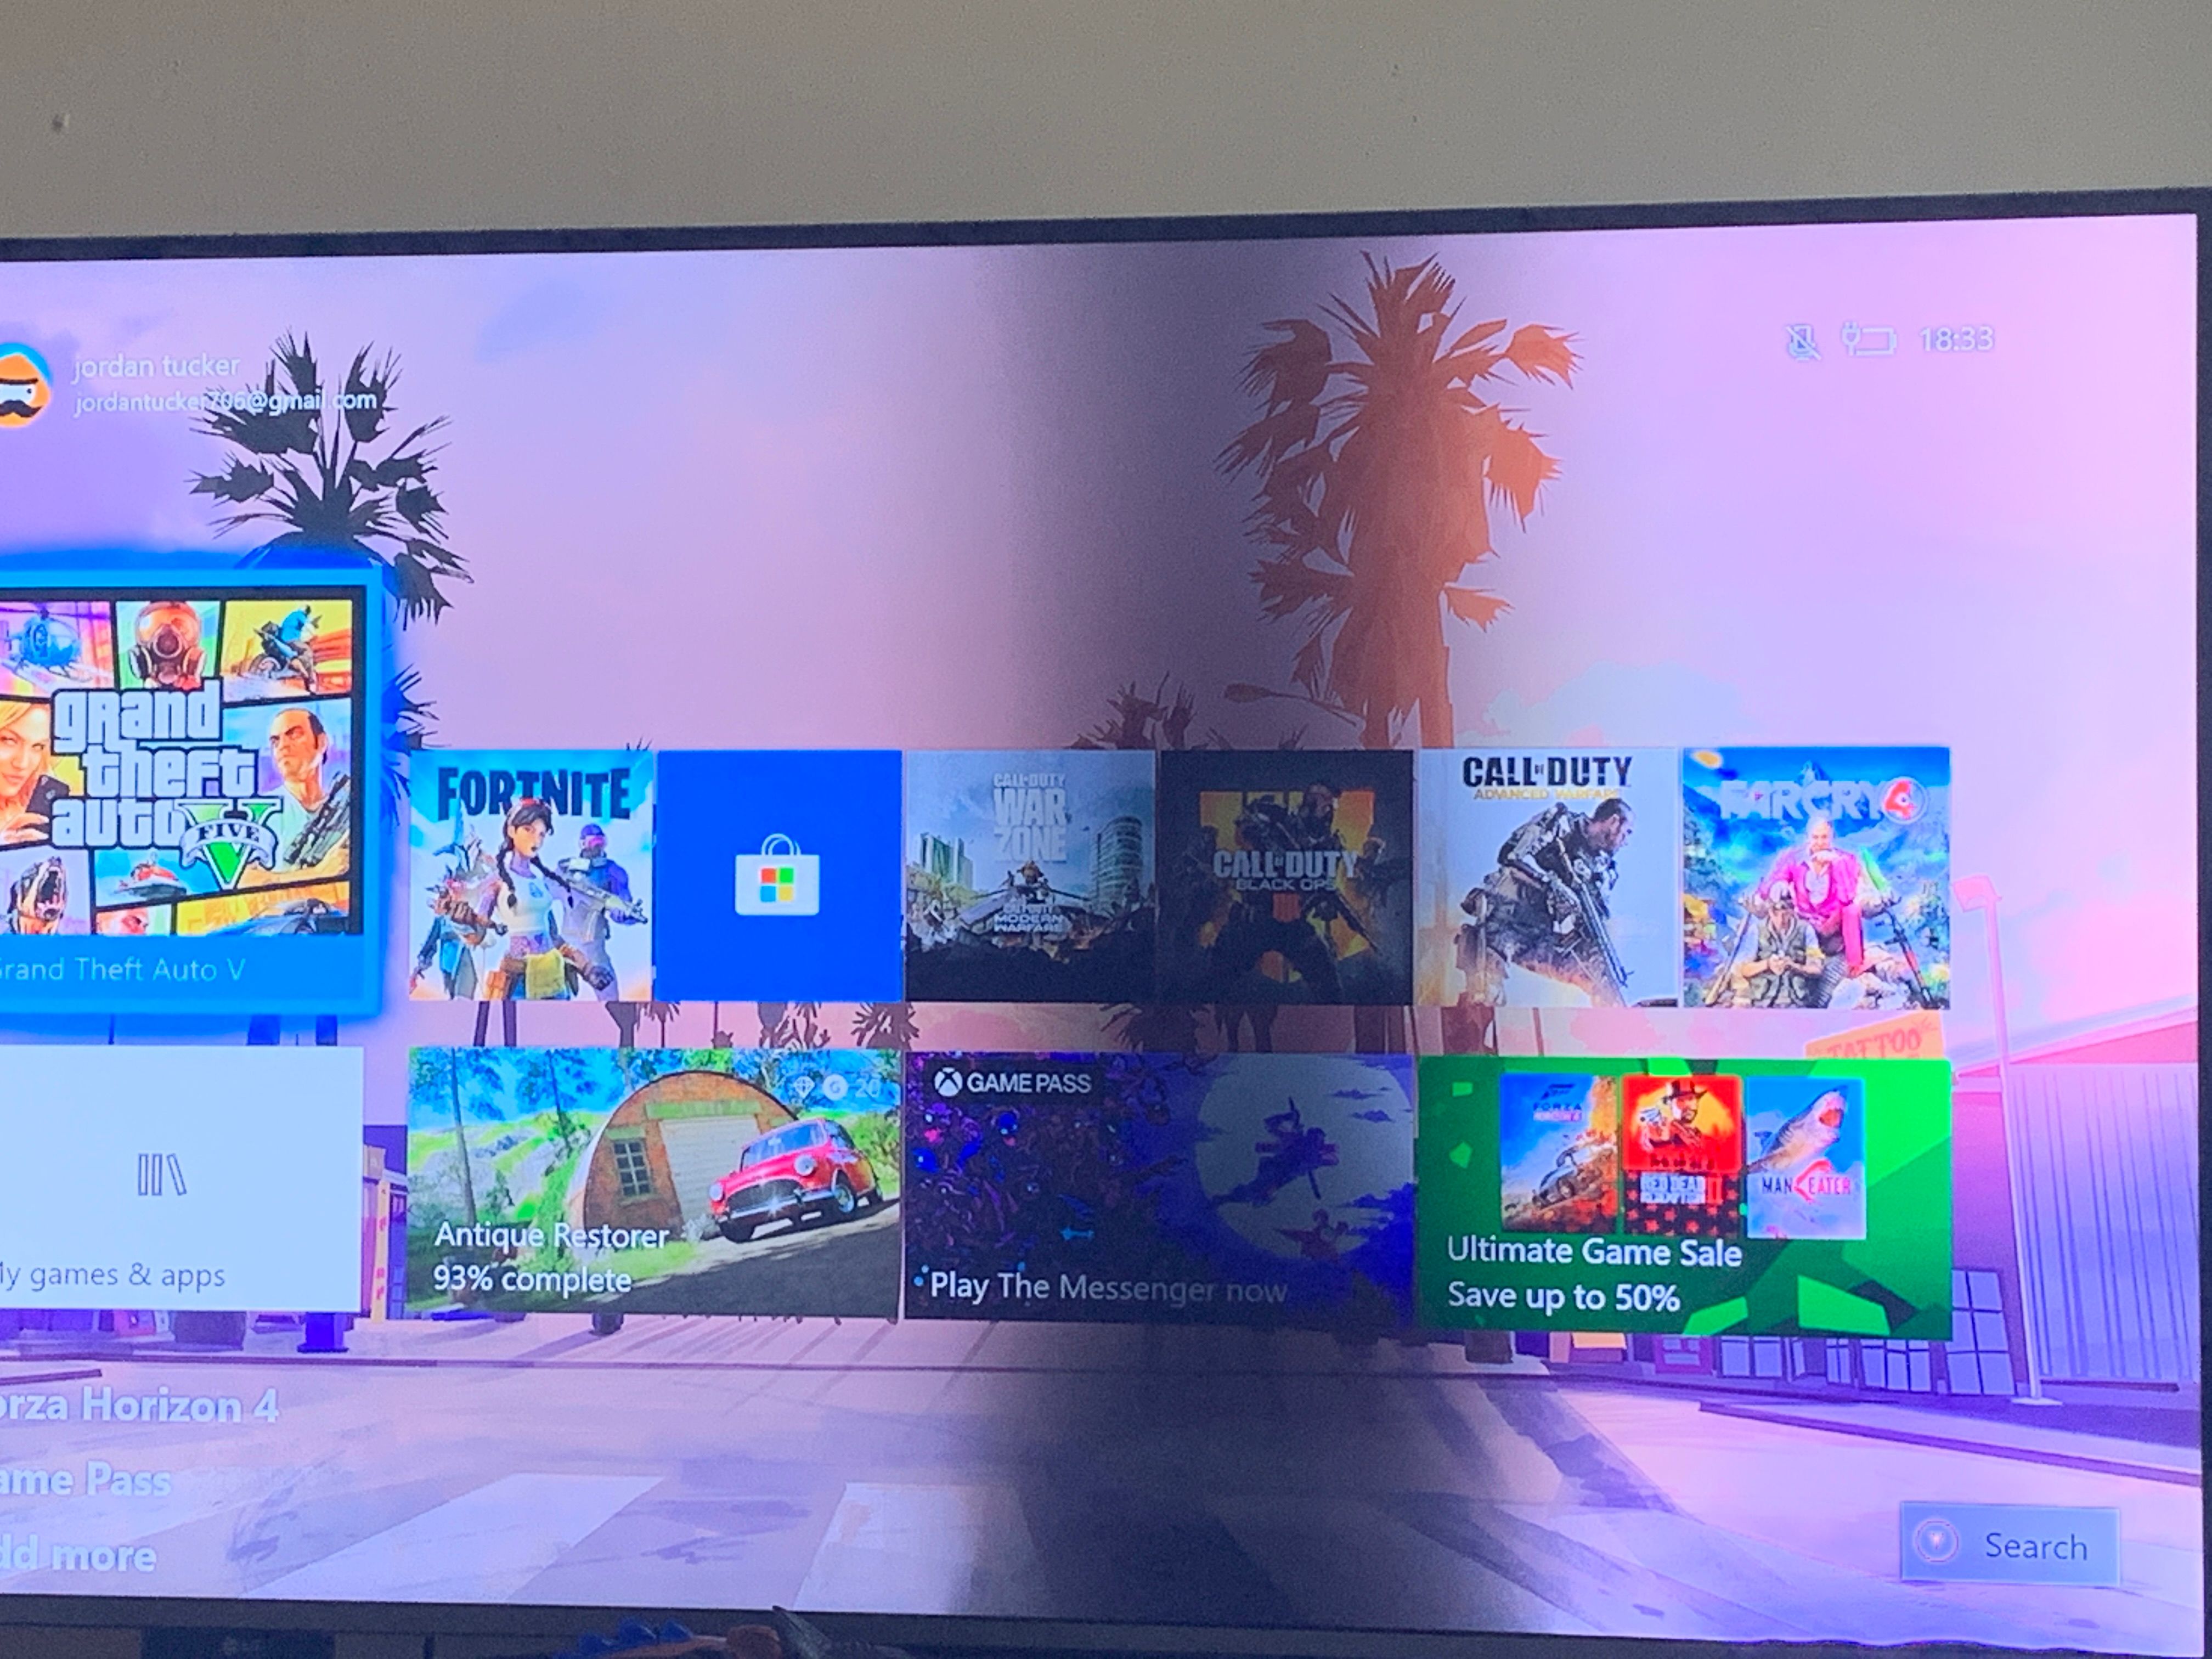 Need part for tv - Samsung Community